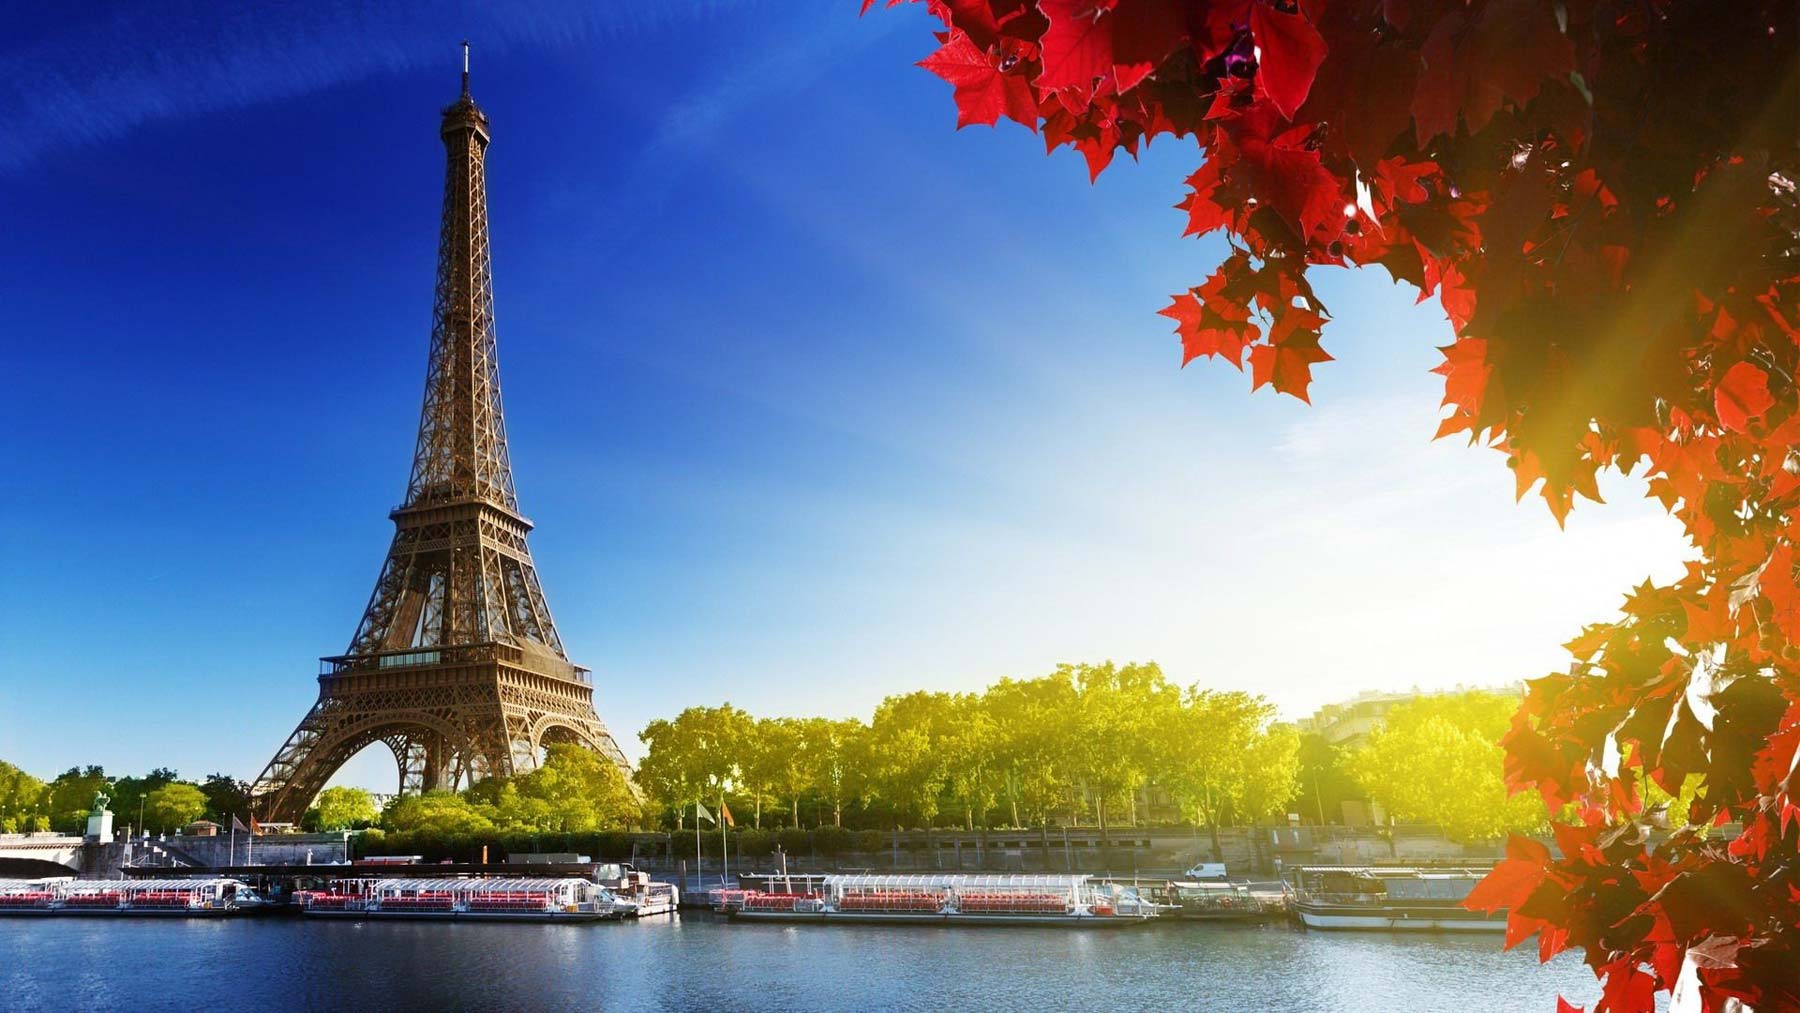 Funny facts that you didn’t know about Eiffel Tower